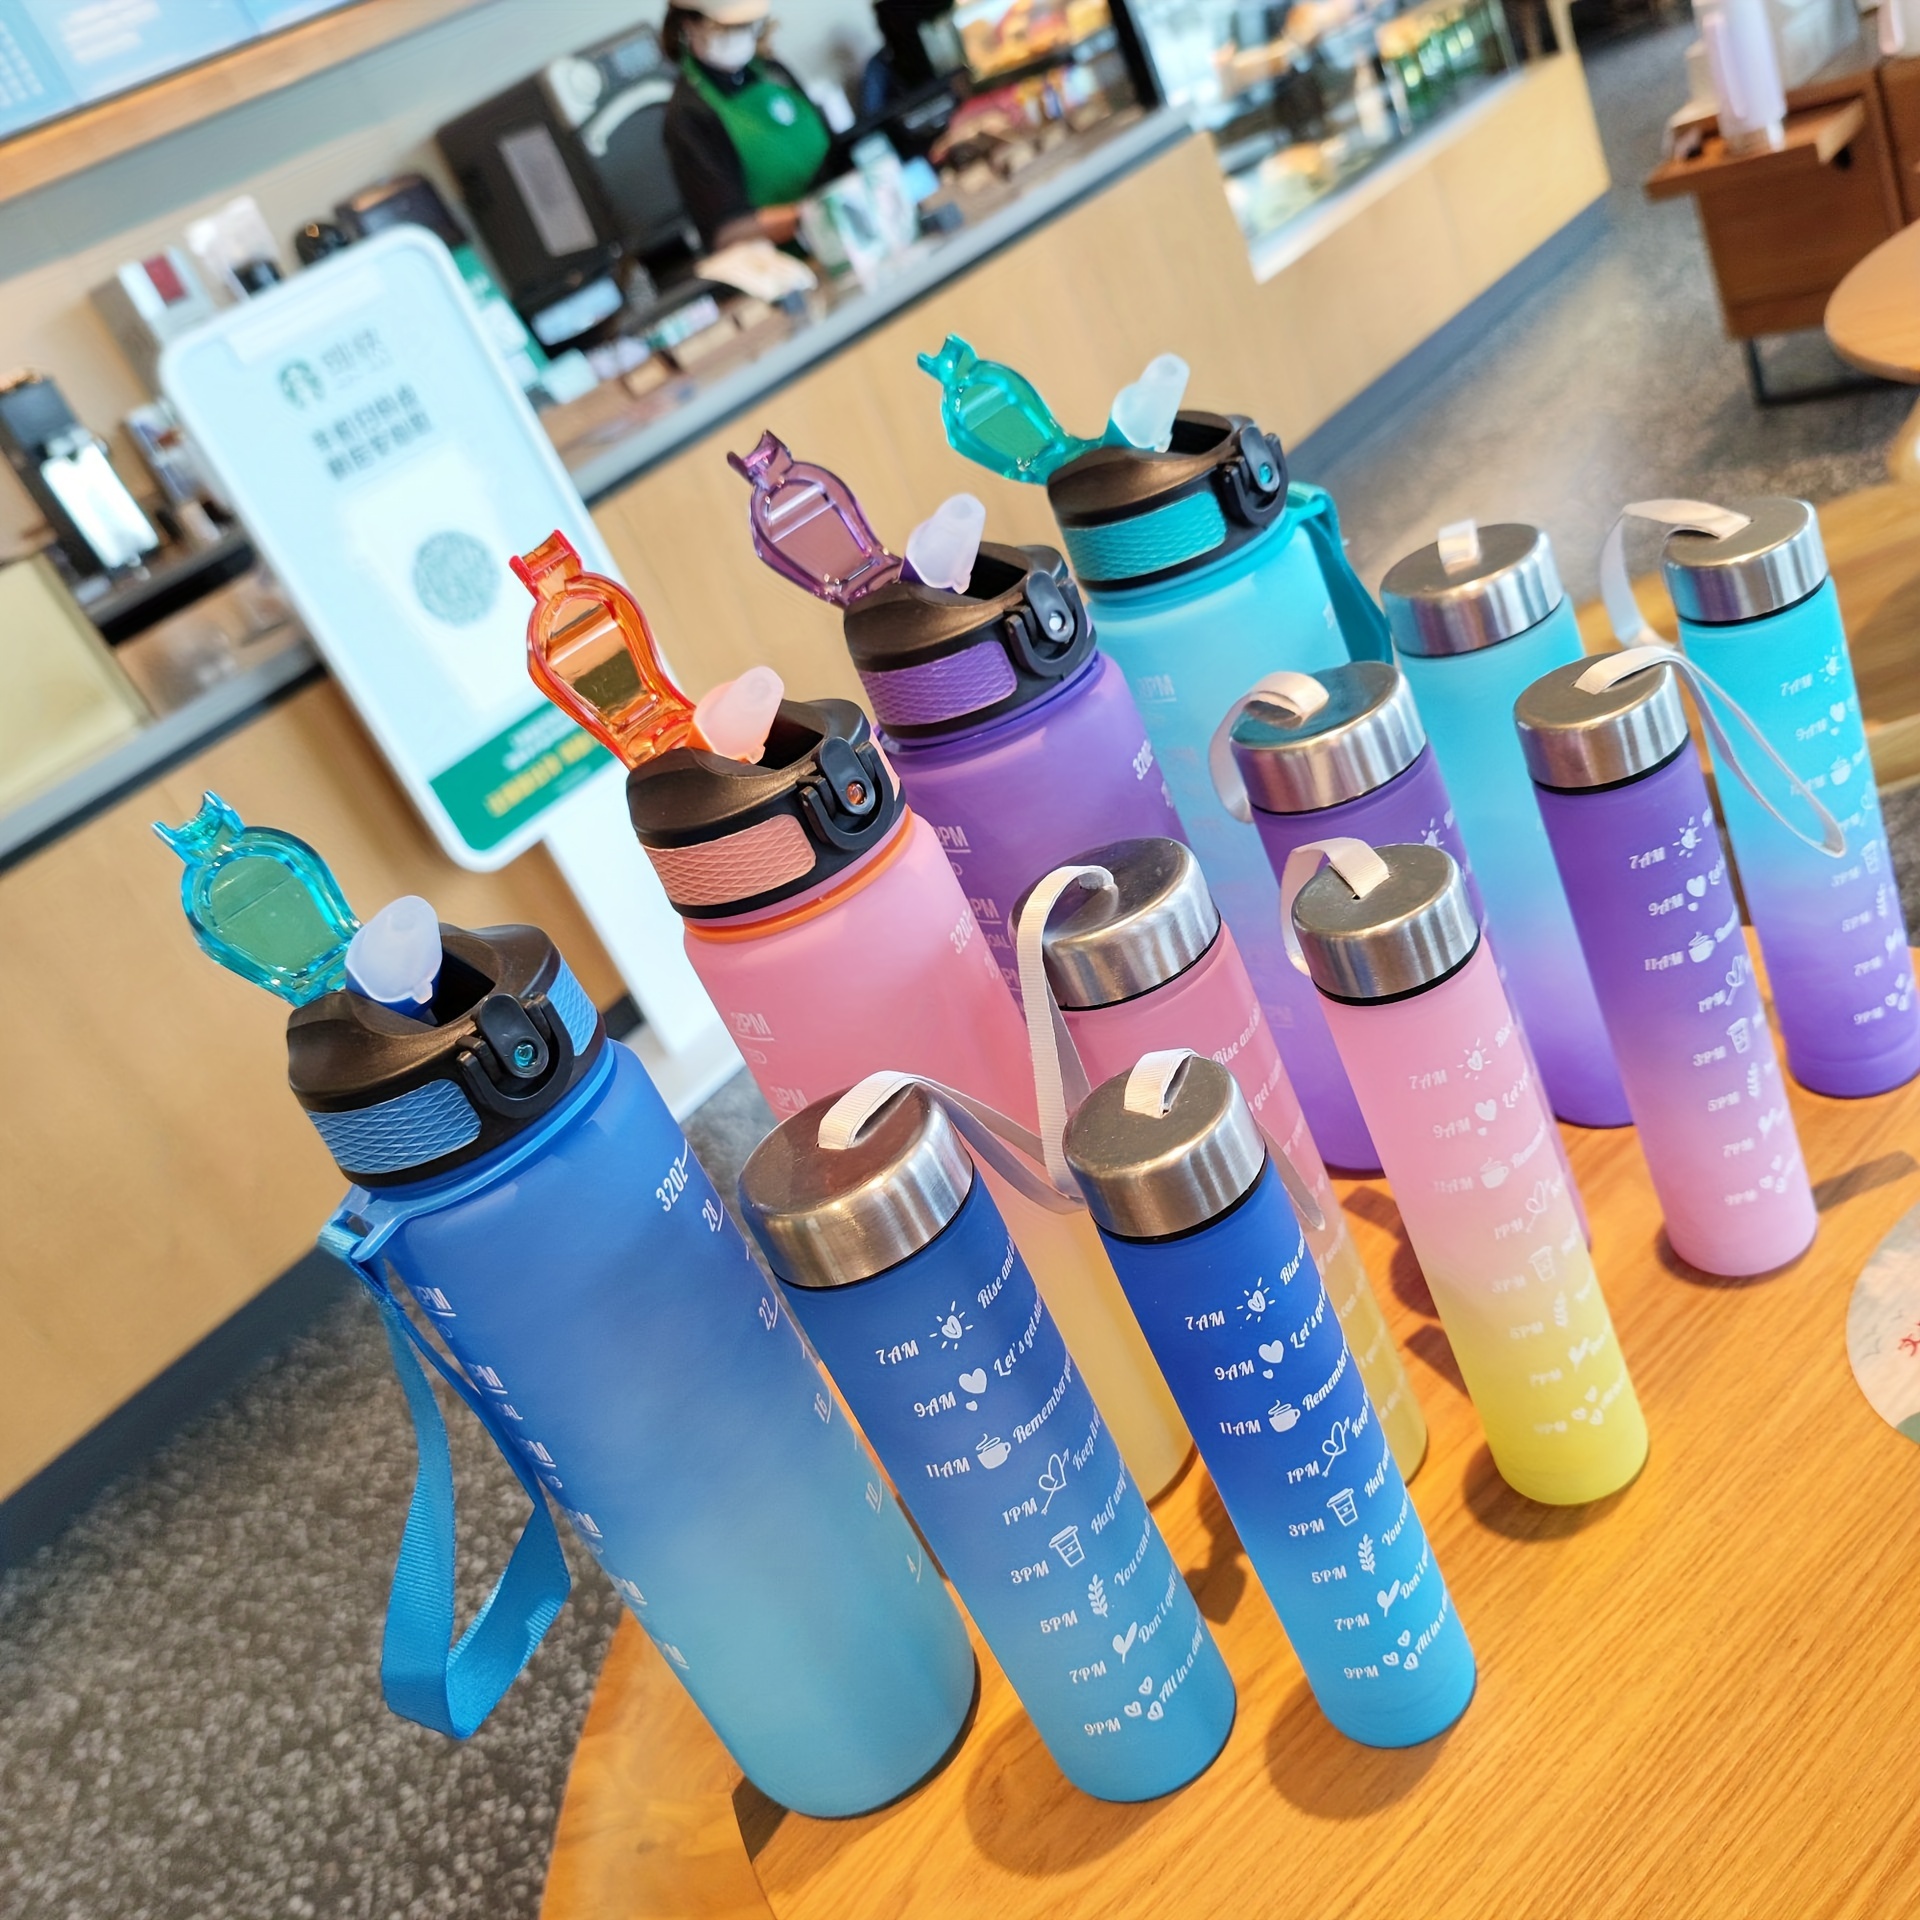 1L 2L Glass Water Bottle with Strap , Sport Water Bottle Outdoor Travel  Portable Leakproof Drinkware Large Capacity Waterbottle